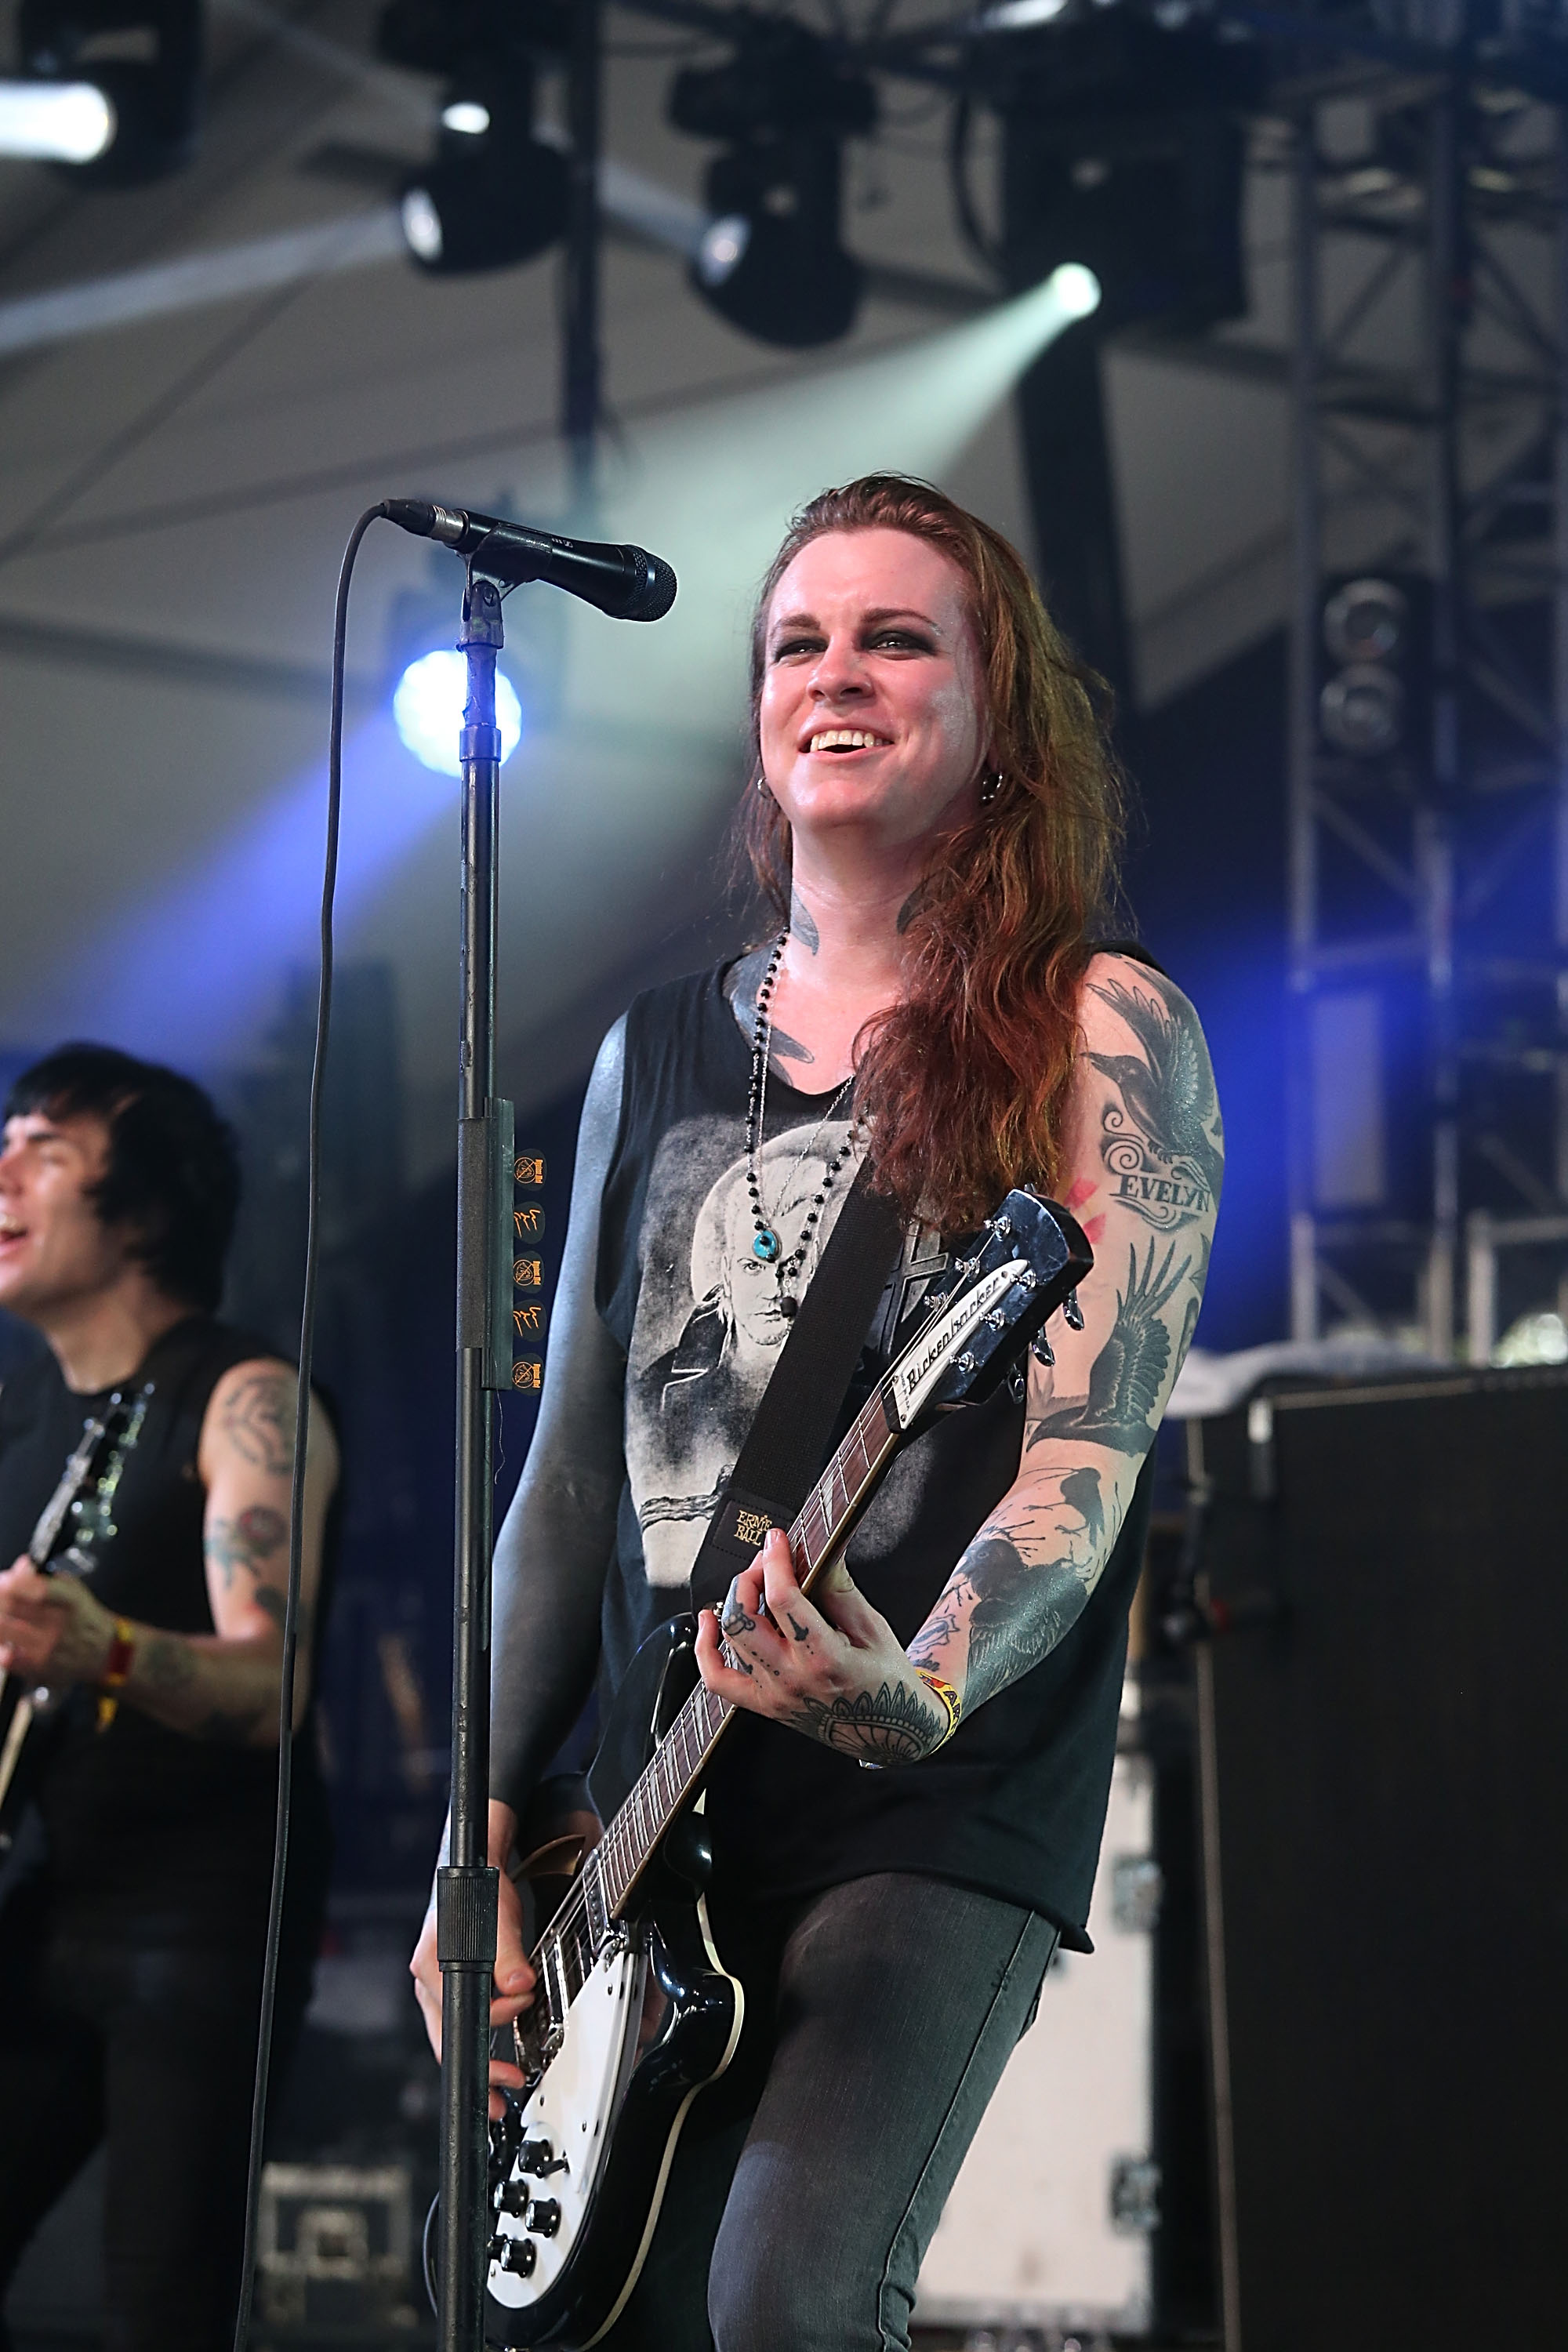 Since coming out publicly in a 2012 Rolling Stone article, the musician Laura Jane Grace has been a vocal advocate for trans acceptance. In 2014, her band Against Me! released the  album Transgender Dysphoria Blues.